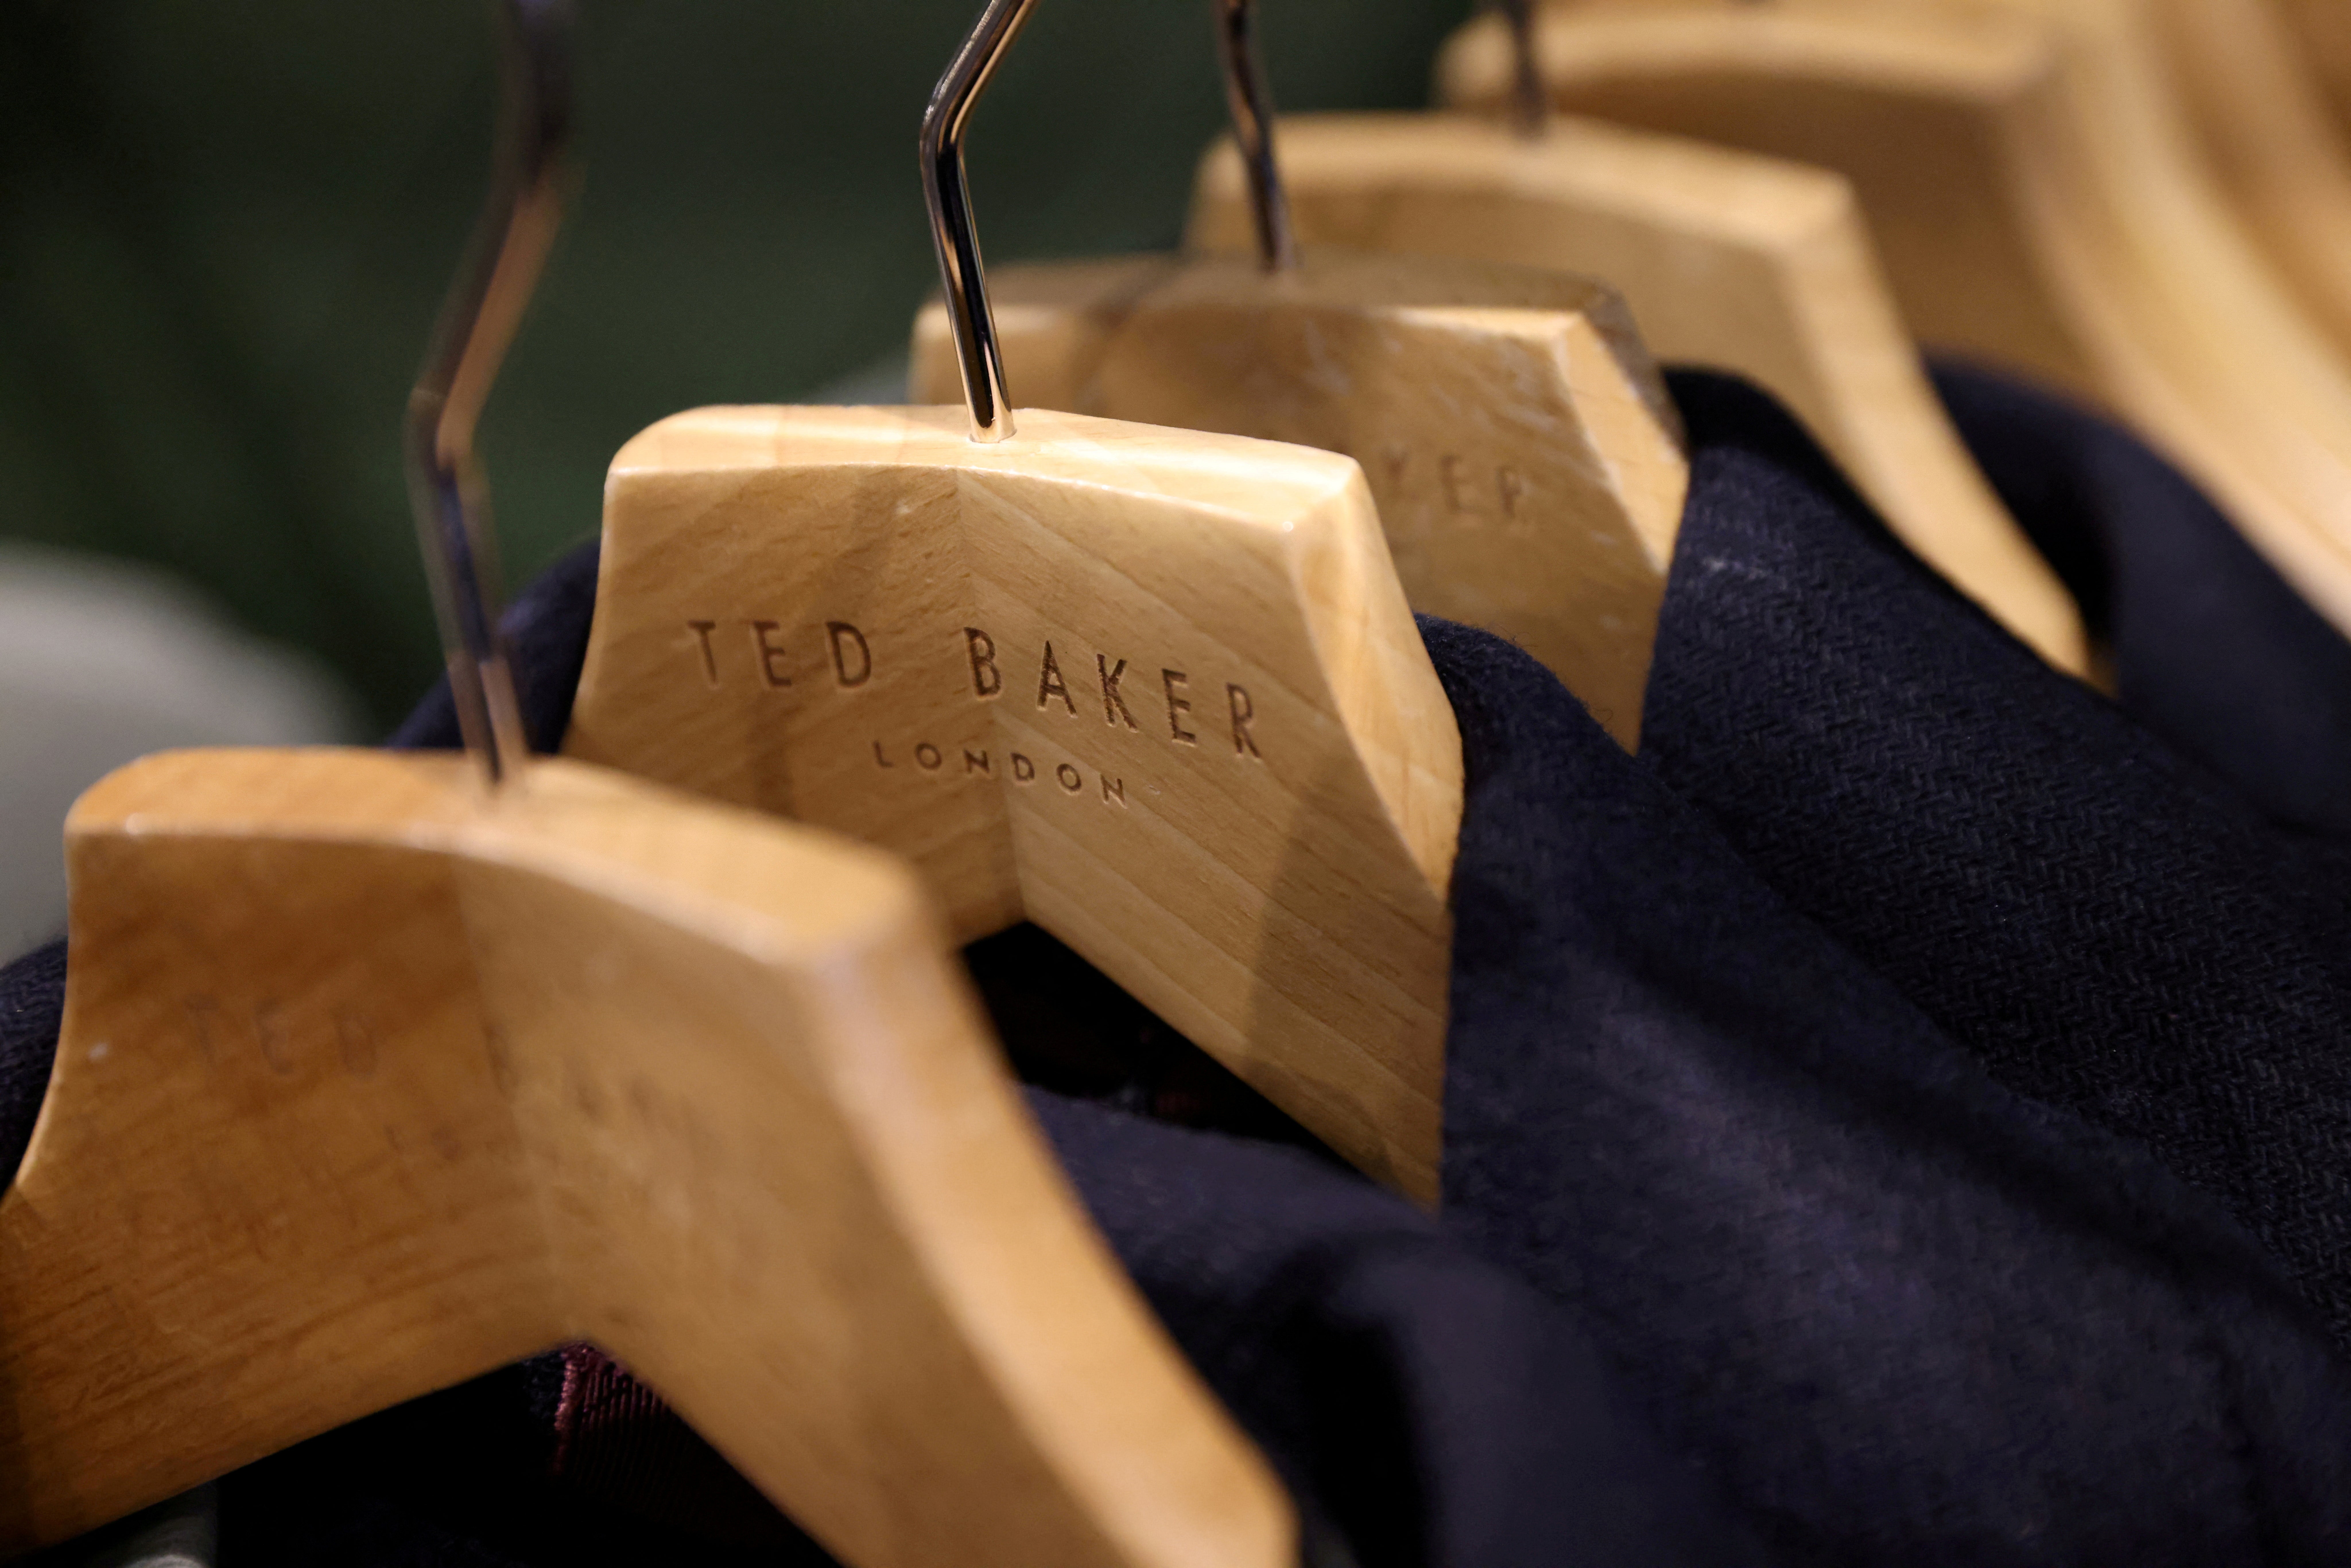 Ted Baker are closing stores